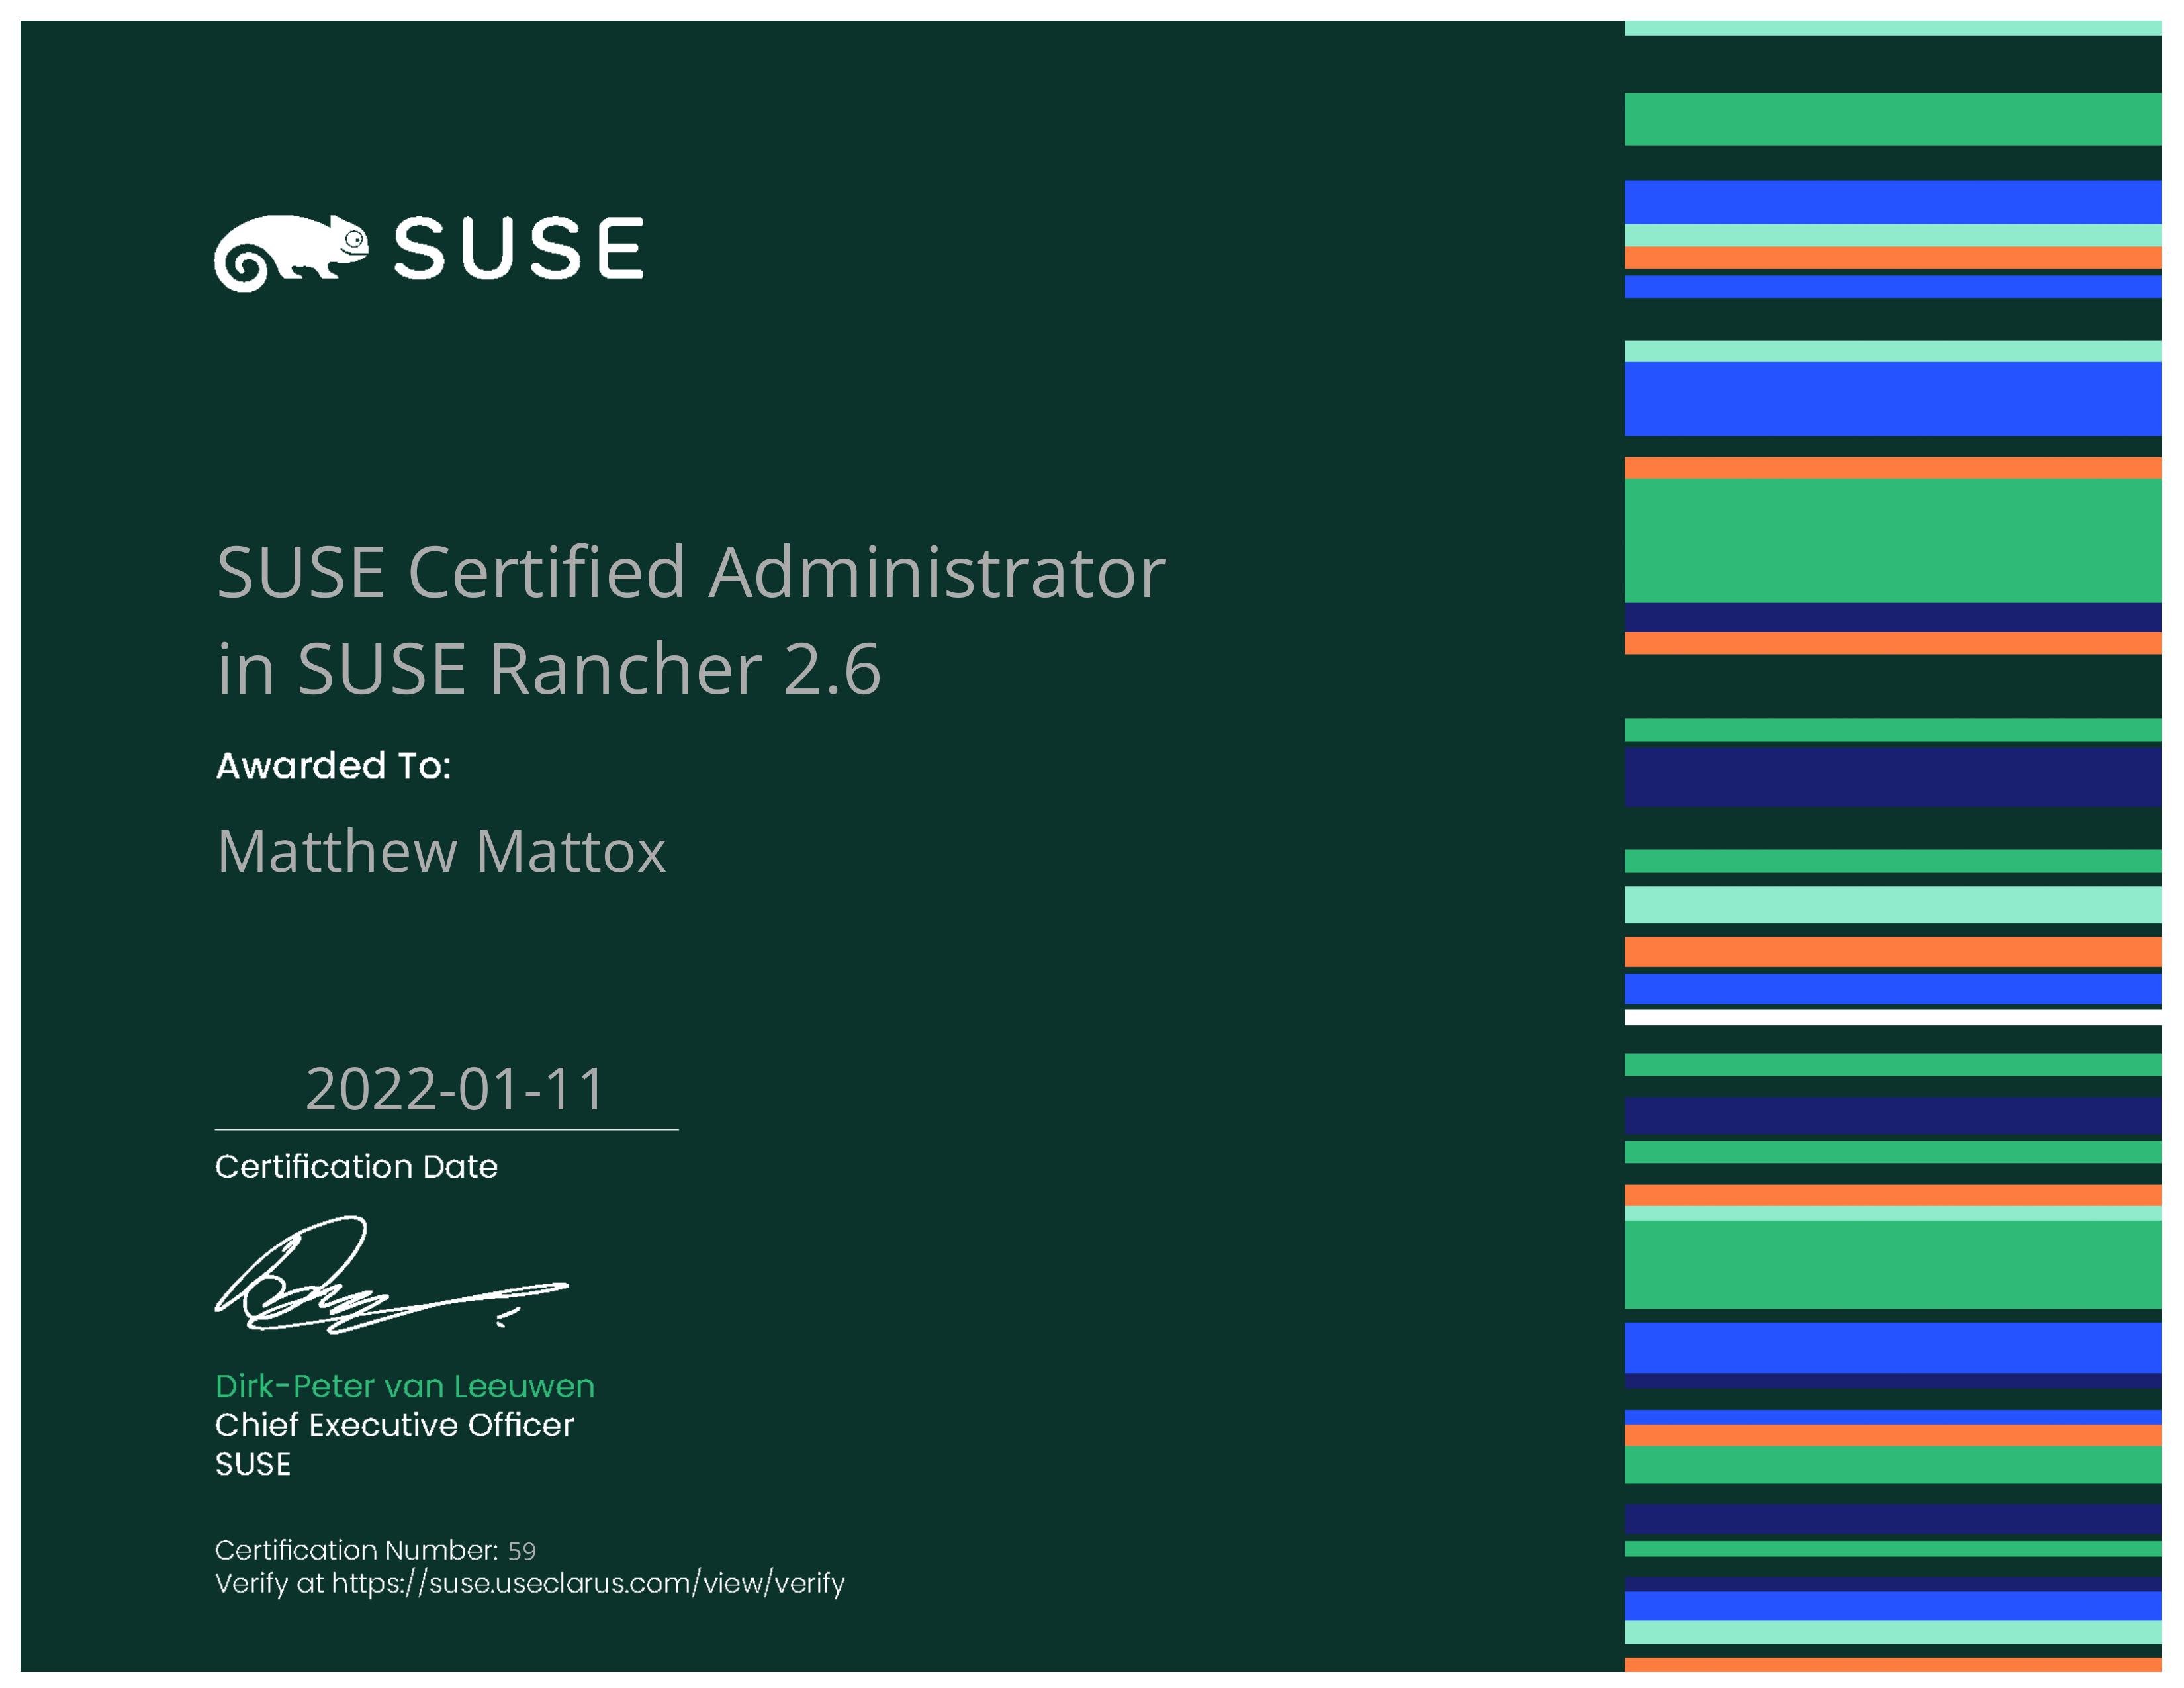 SUSE Certified Administrator in SUSE Rancher 2.6